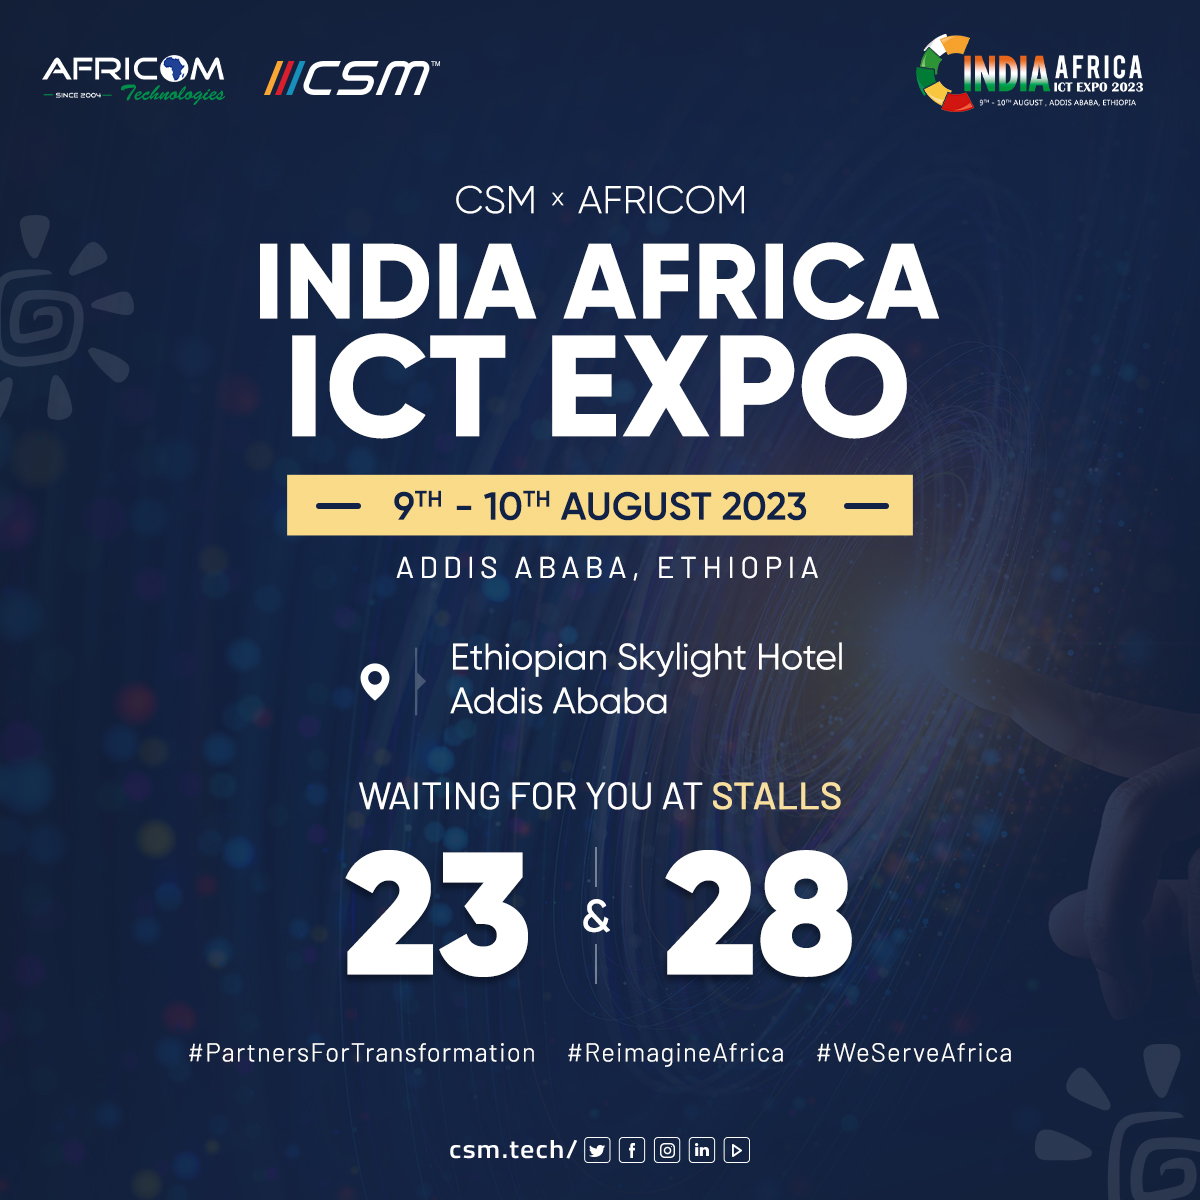 📢 Exciting news!

CSM & AFRICOM are waiting to meet you at the India Africa ICT Expo in Addis Ababa. Join us and let's connect!

#PartnersForTransformation #ReimagineAfrica #WeServeAfrica